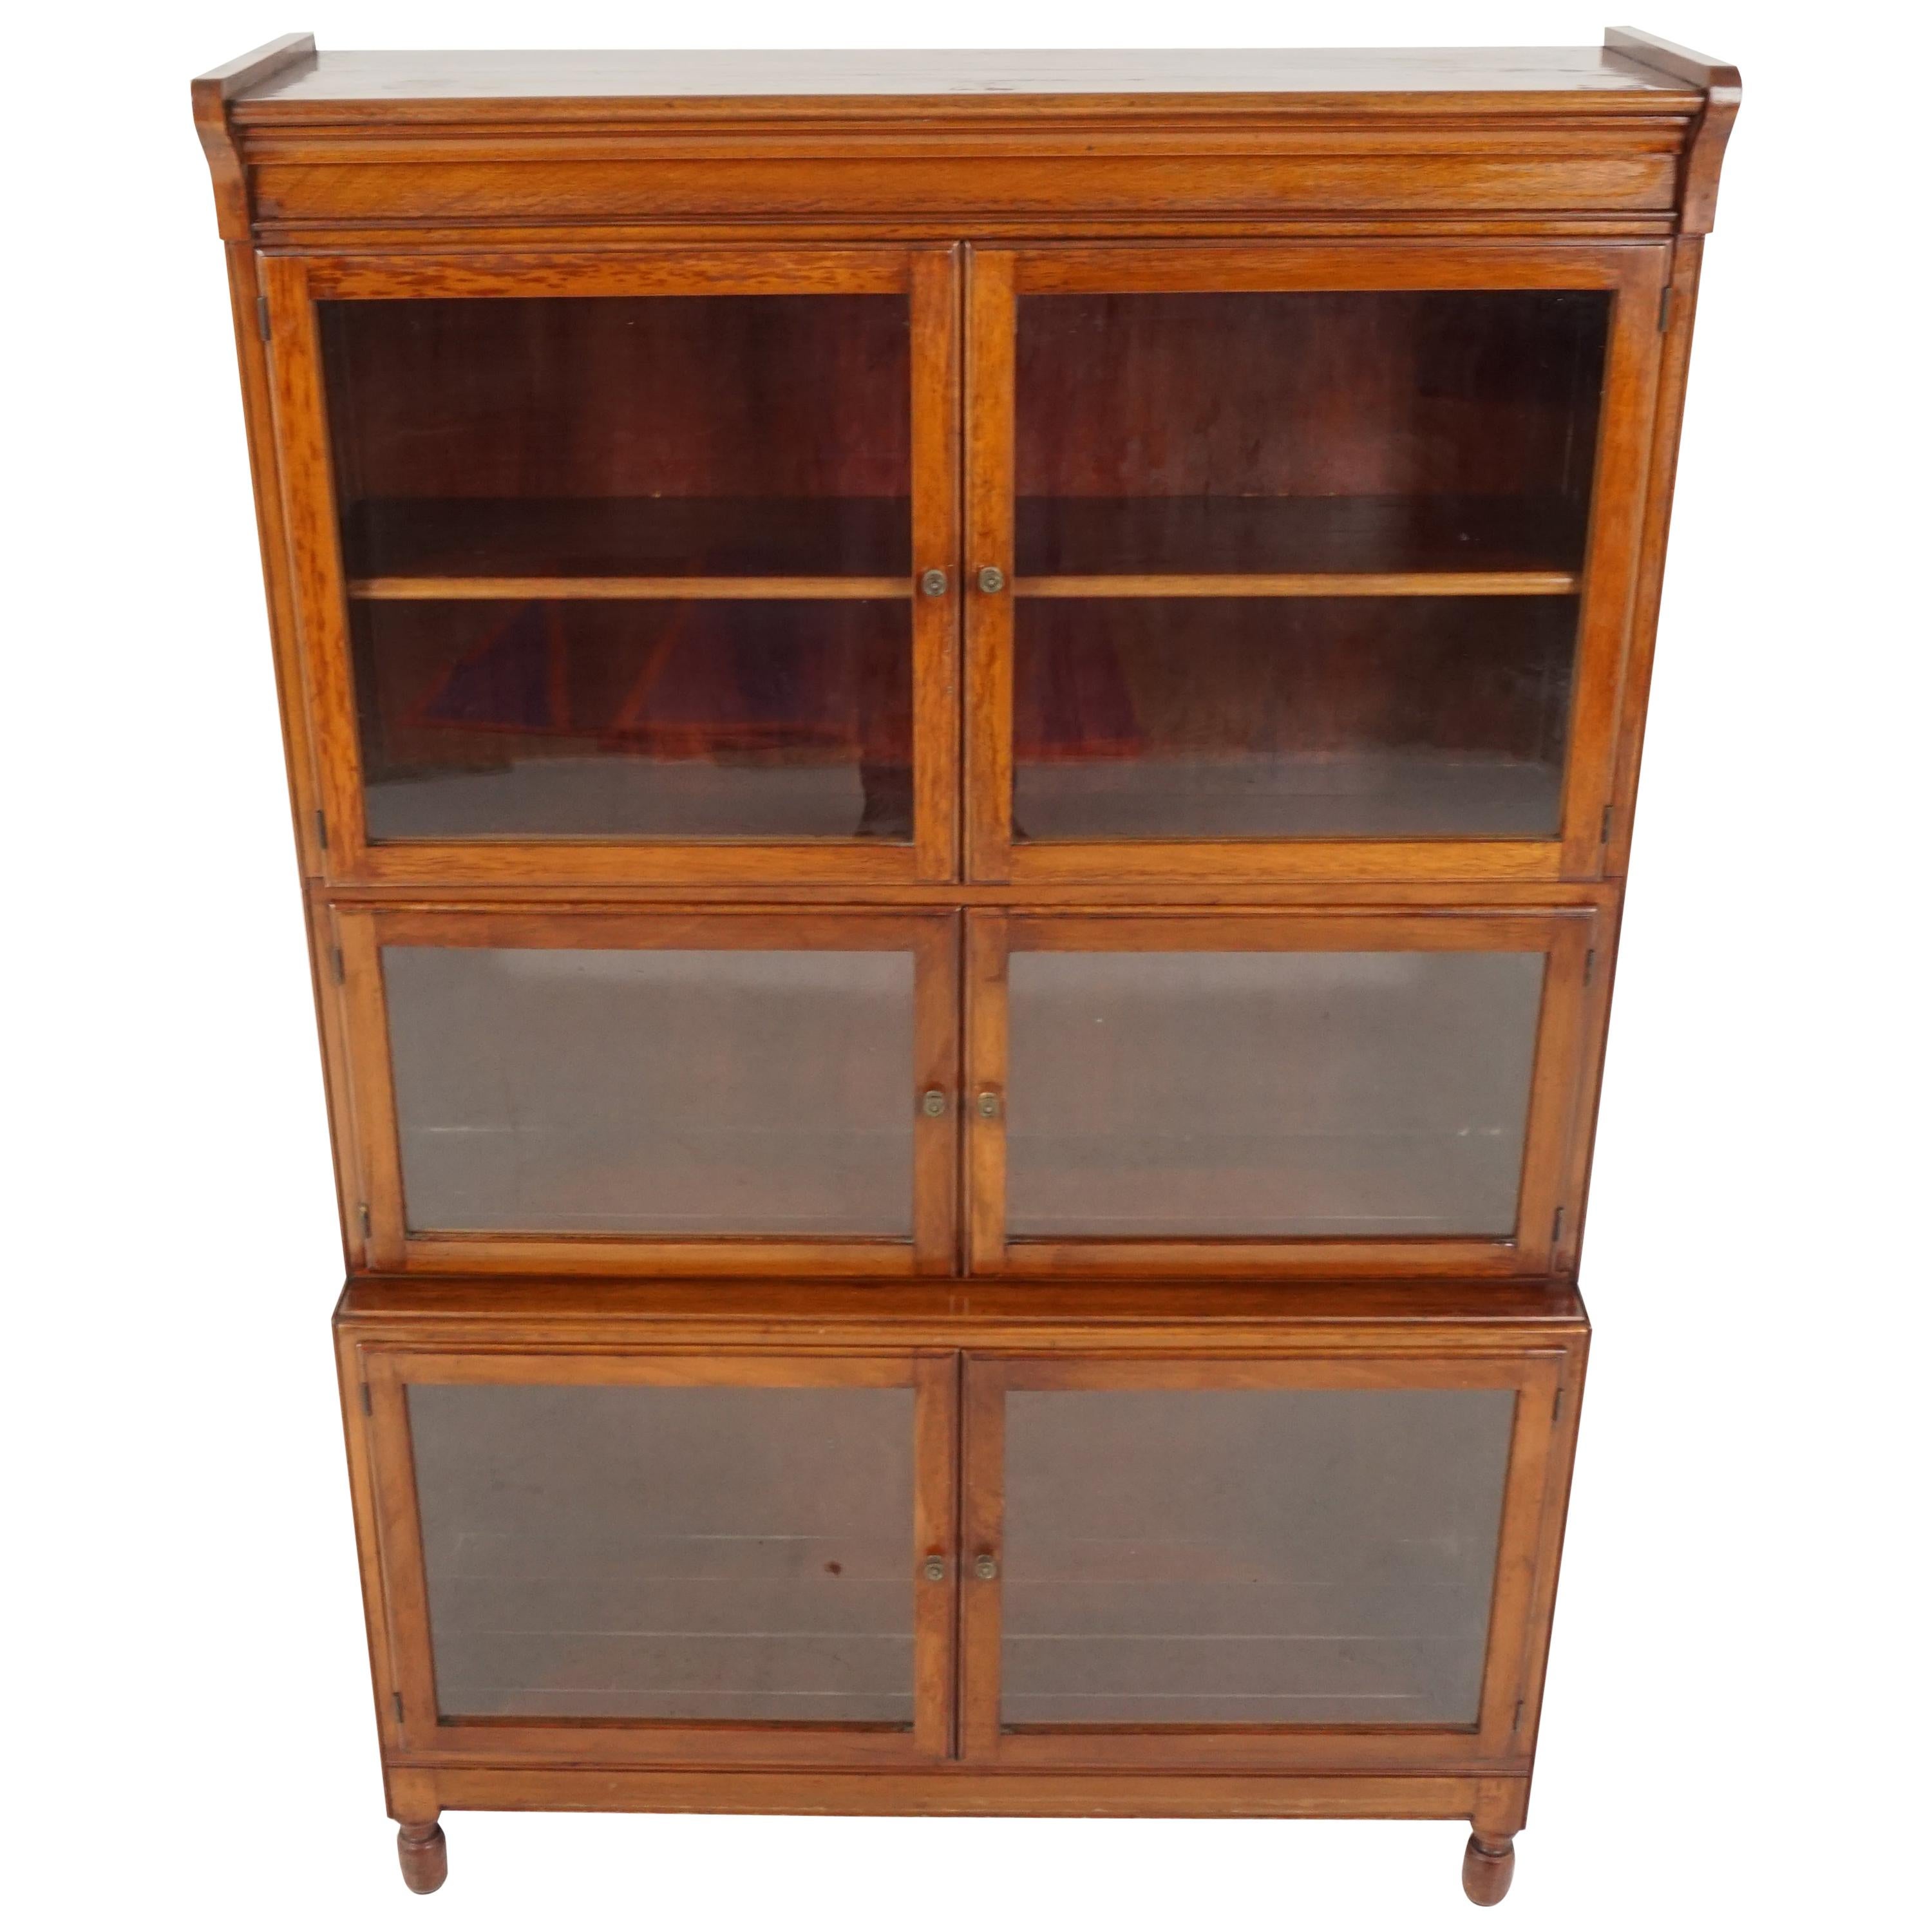 Antique Walnut Bookcase, Lawyer Sectional Bookcase by Minty, 1920